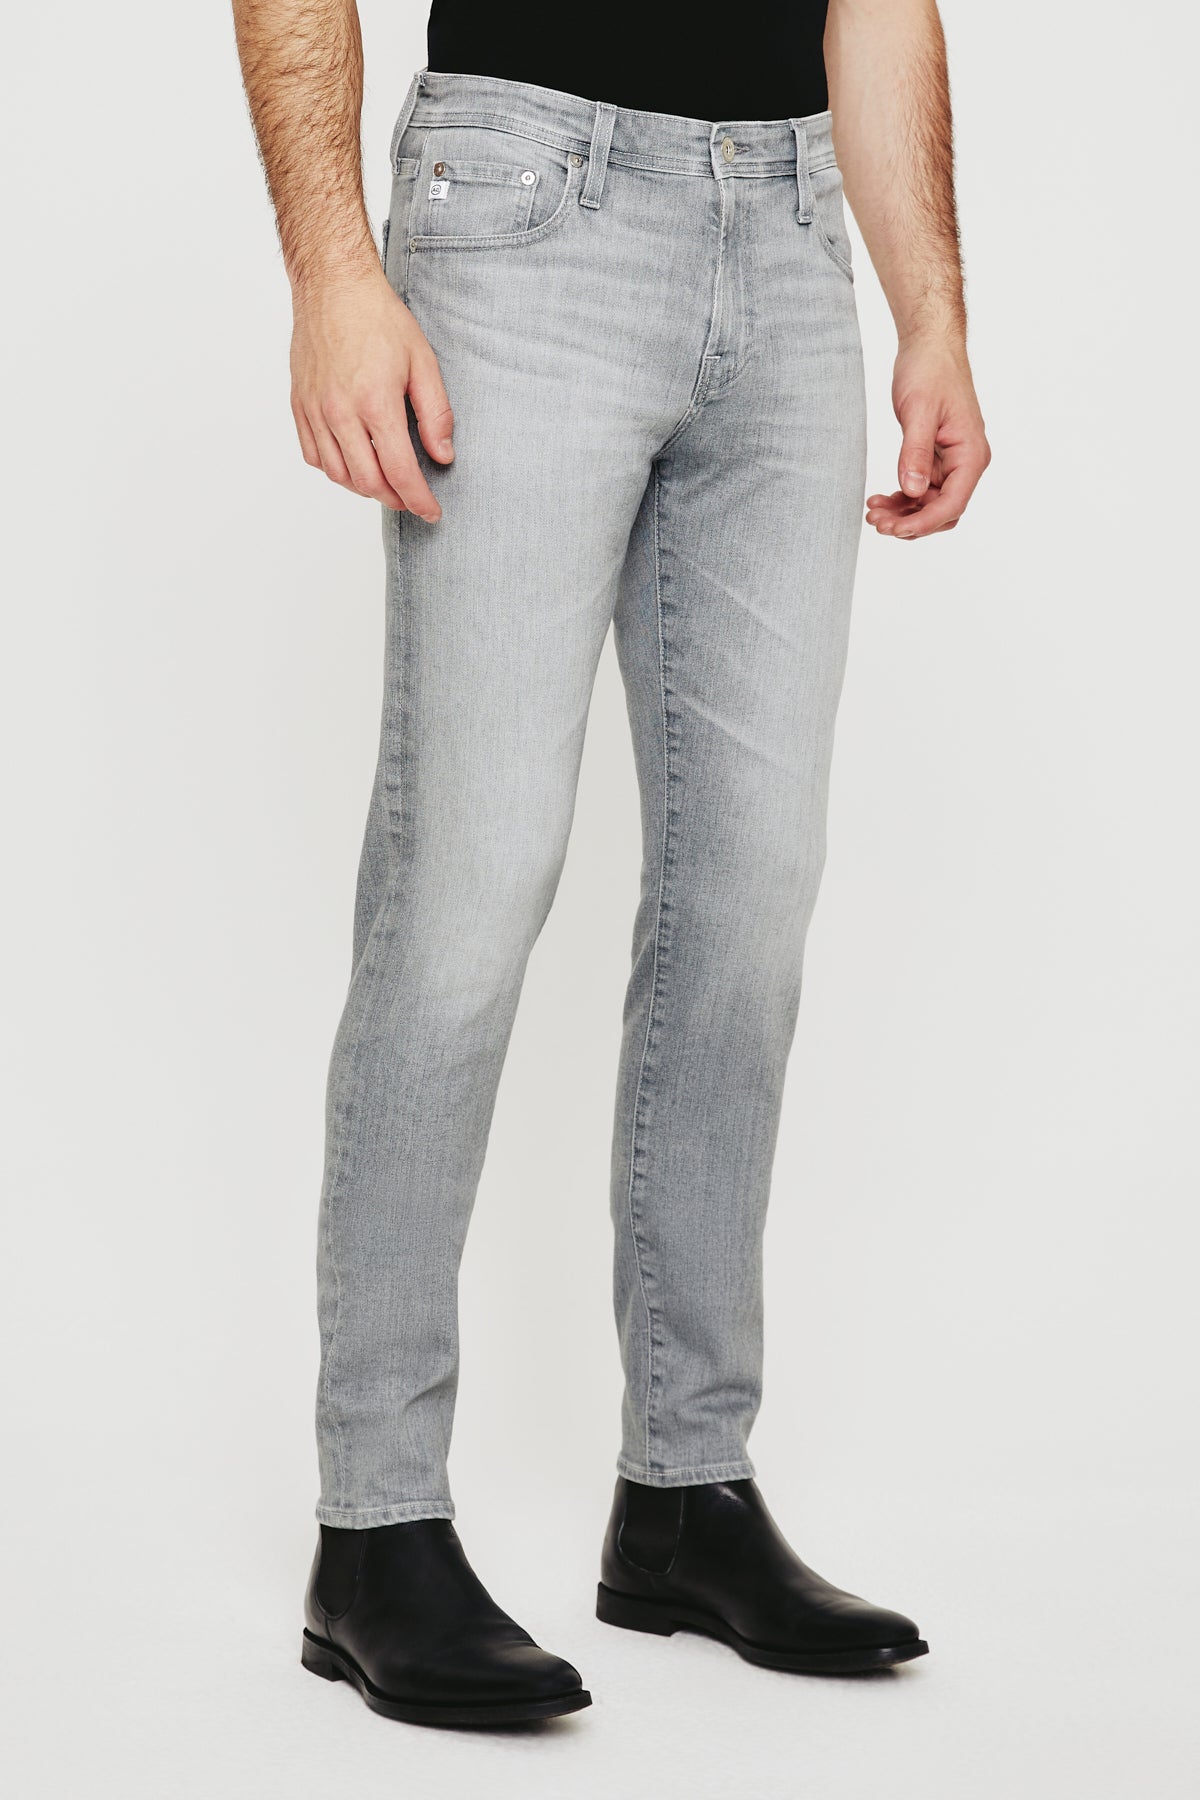 ag jeans dylan slim fit jean in huerta grey, front view